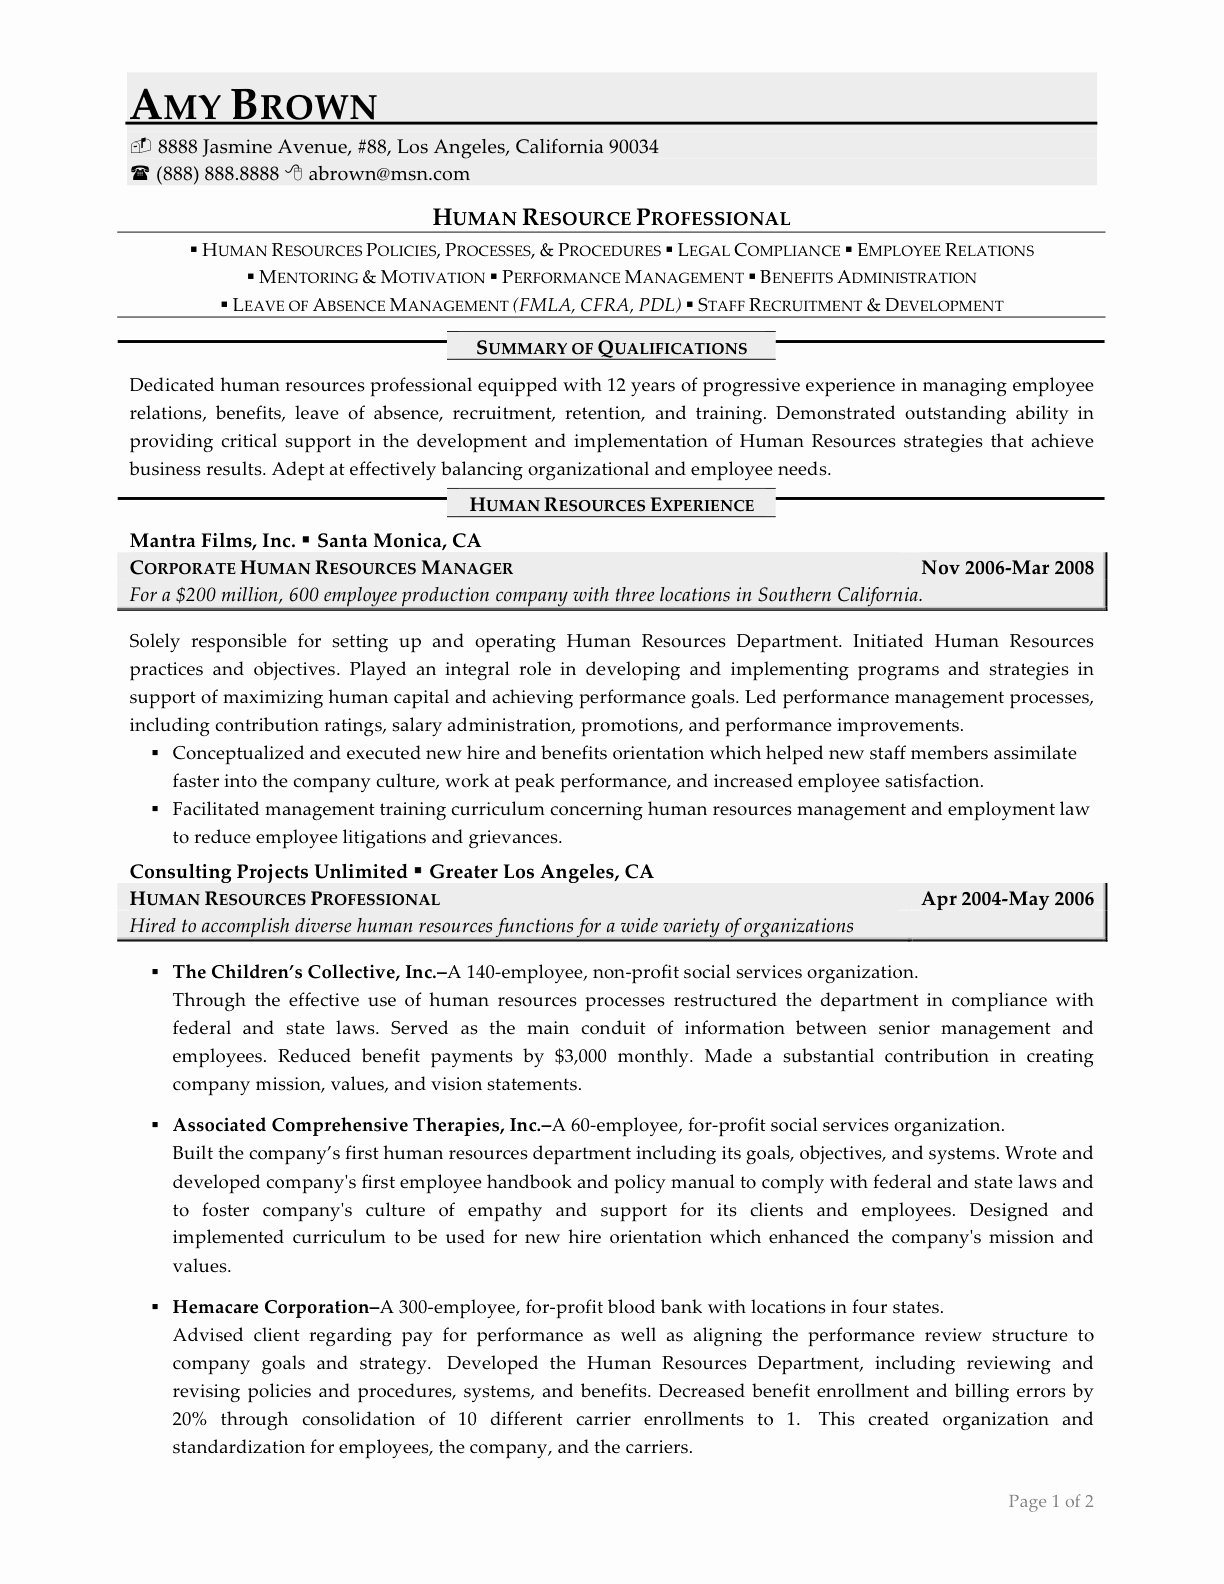 Human Resources Resume Examples Resume Professional Writers